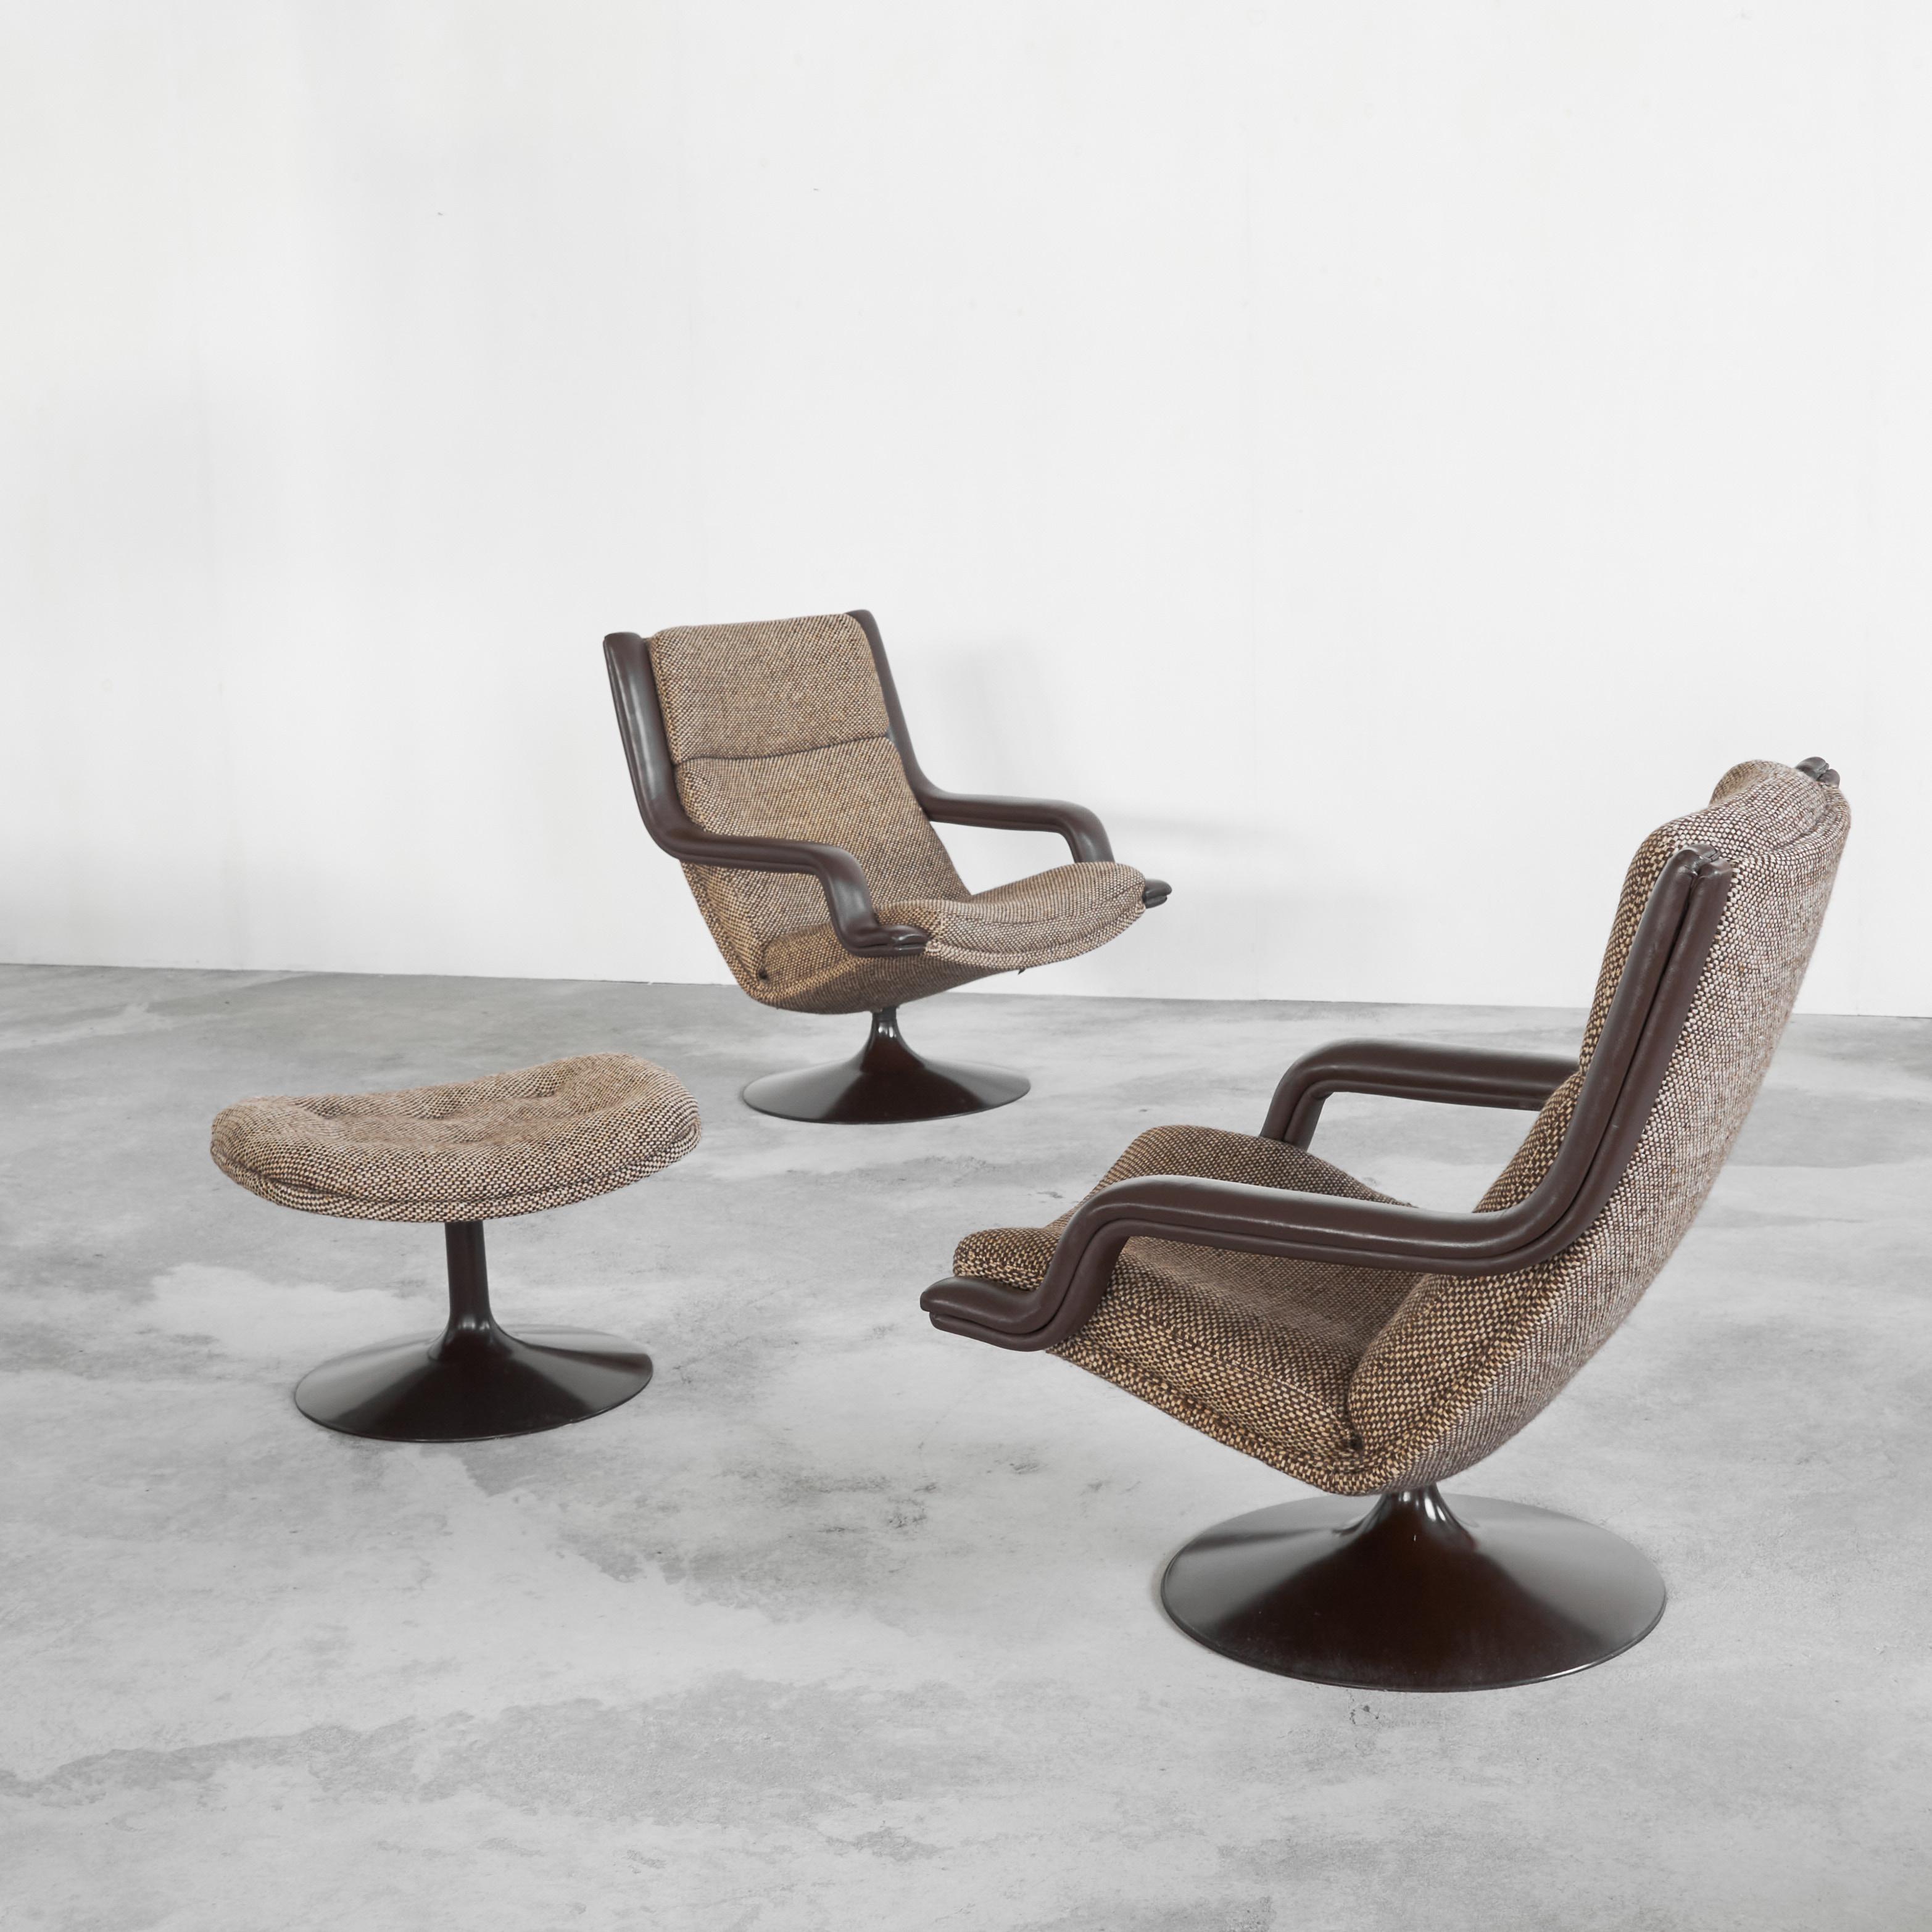 Leather Geoffrey Harcourt Pair of F152 Lounge Chairs with Ottoman for Artifort 1975 For Sale